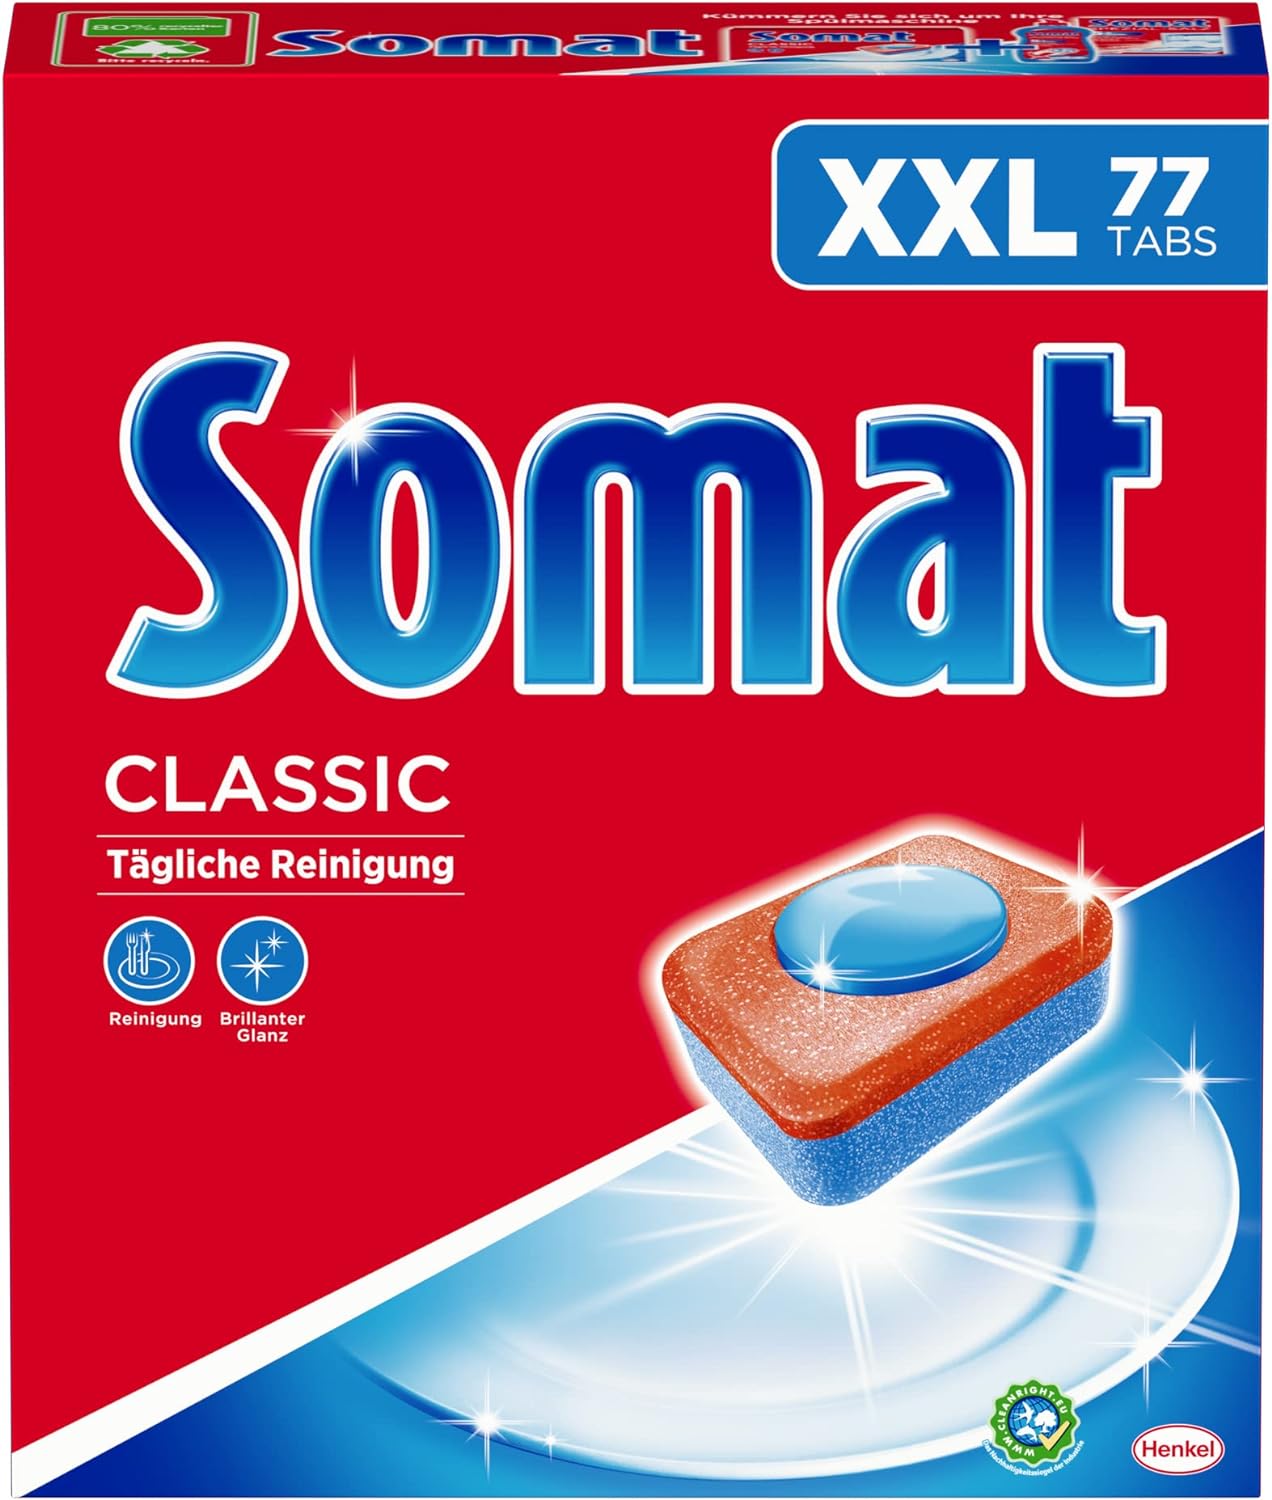 Somat Classic Dishwasher Tabs | XXL Pack - Dishwasher Tabs For Daily Cleaning Of Cutlery And Dishes | With Extra Power And Protection Against Glass Corrosion - 77 Tabs